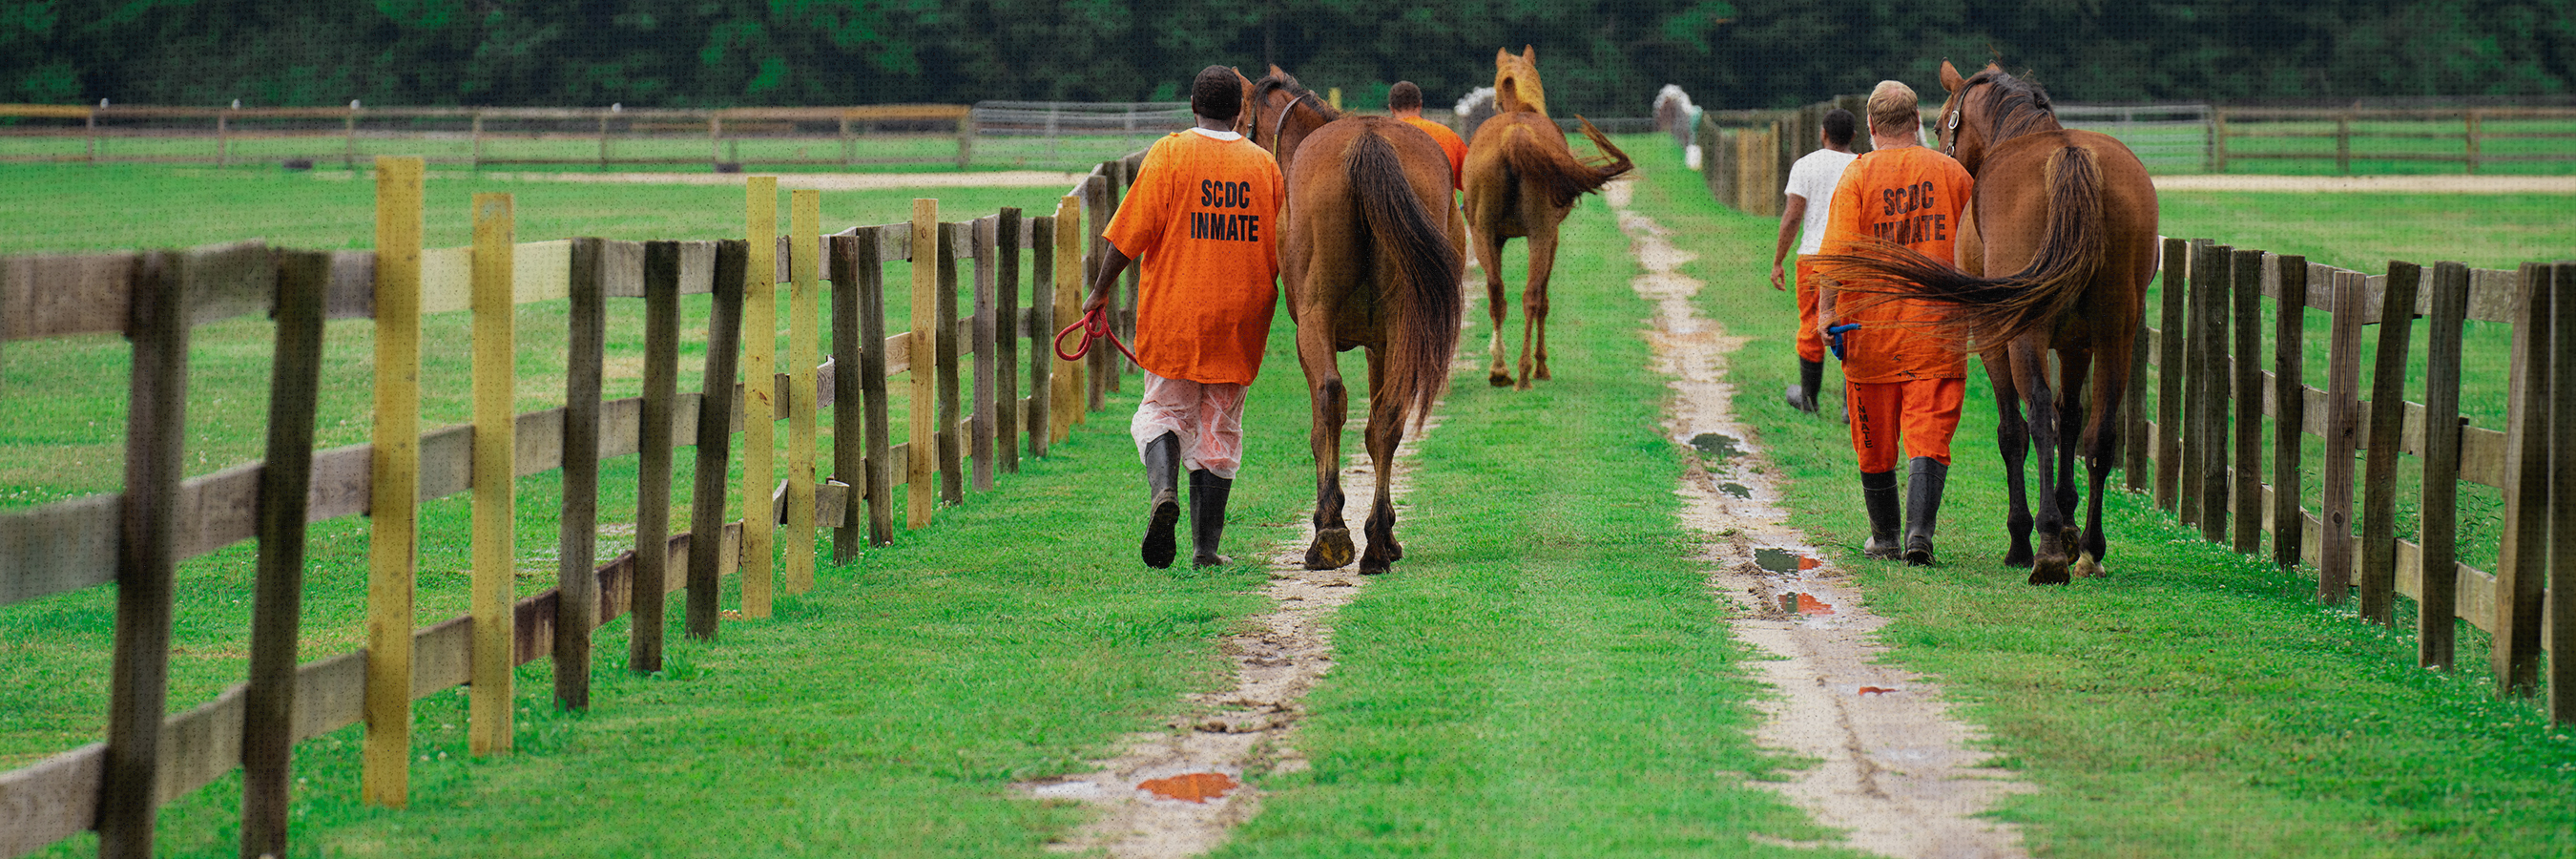 Inmates Guiding Horses to Pasture